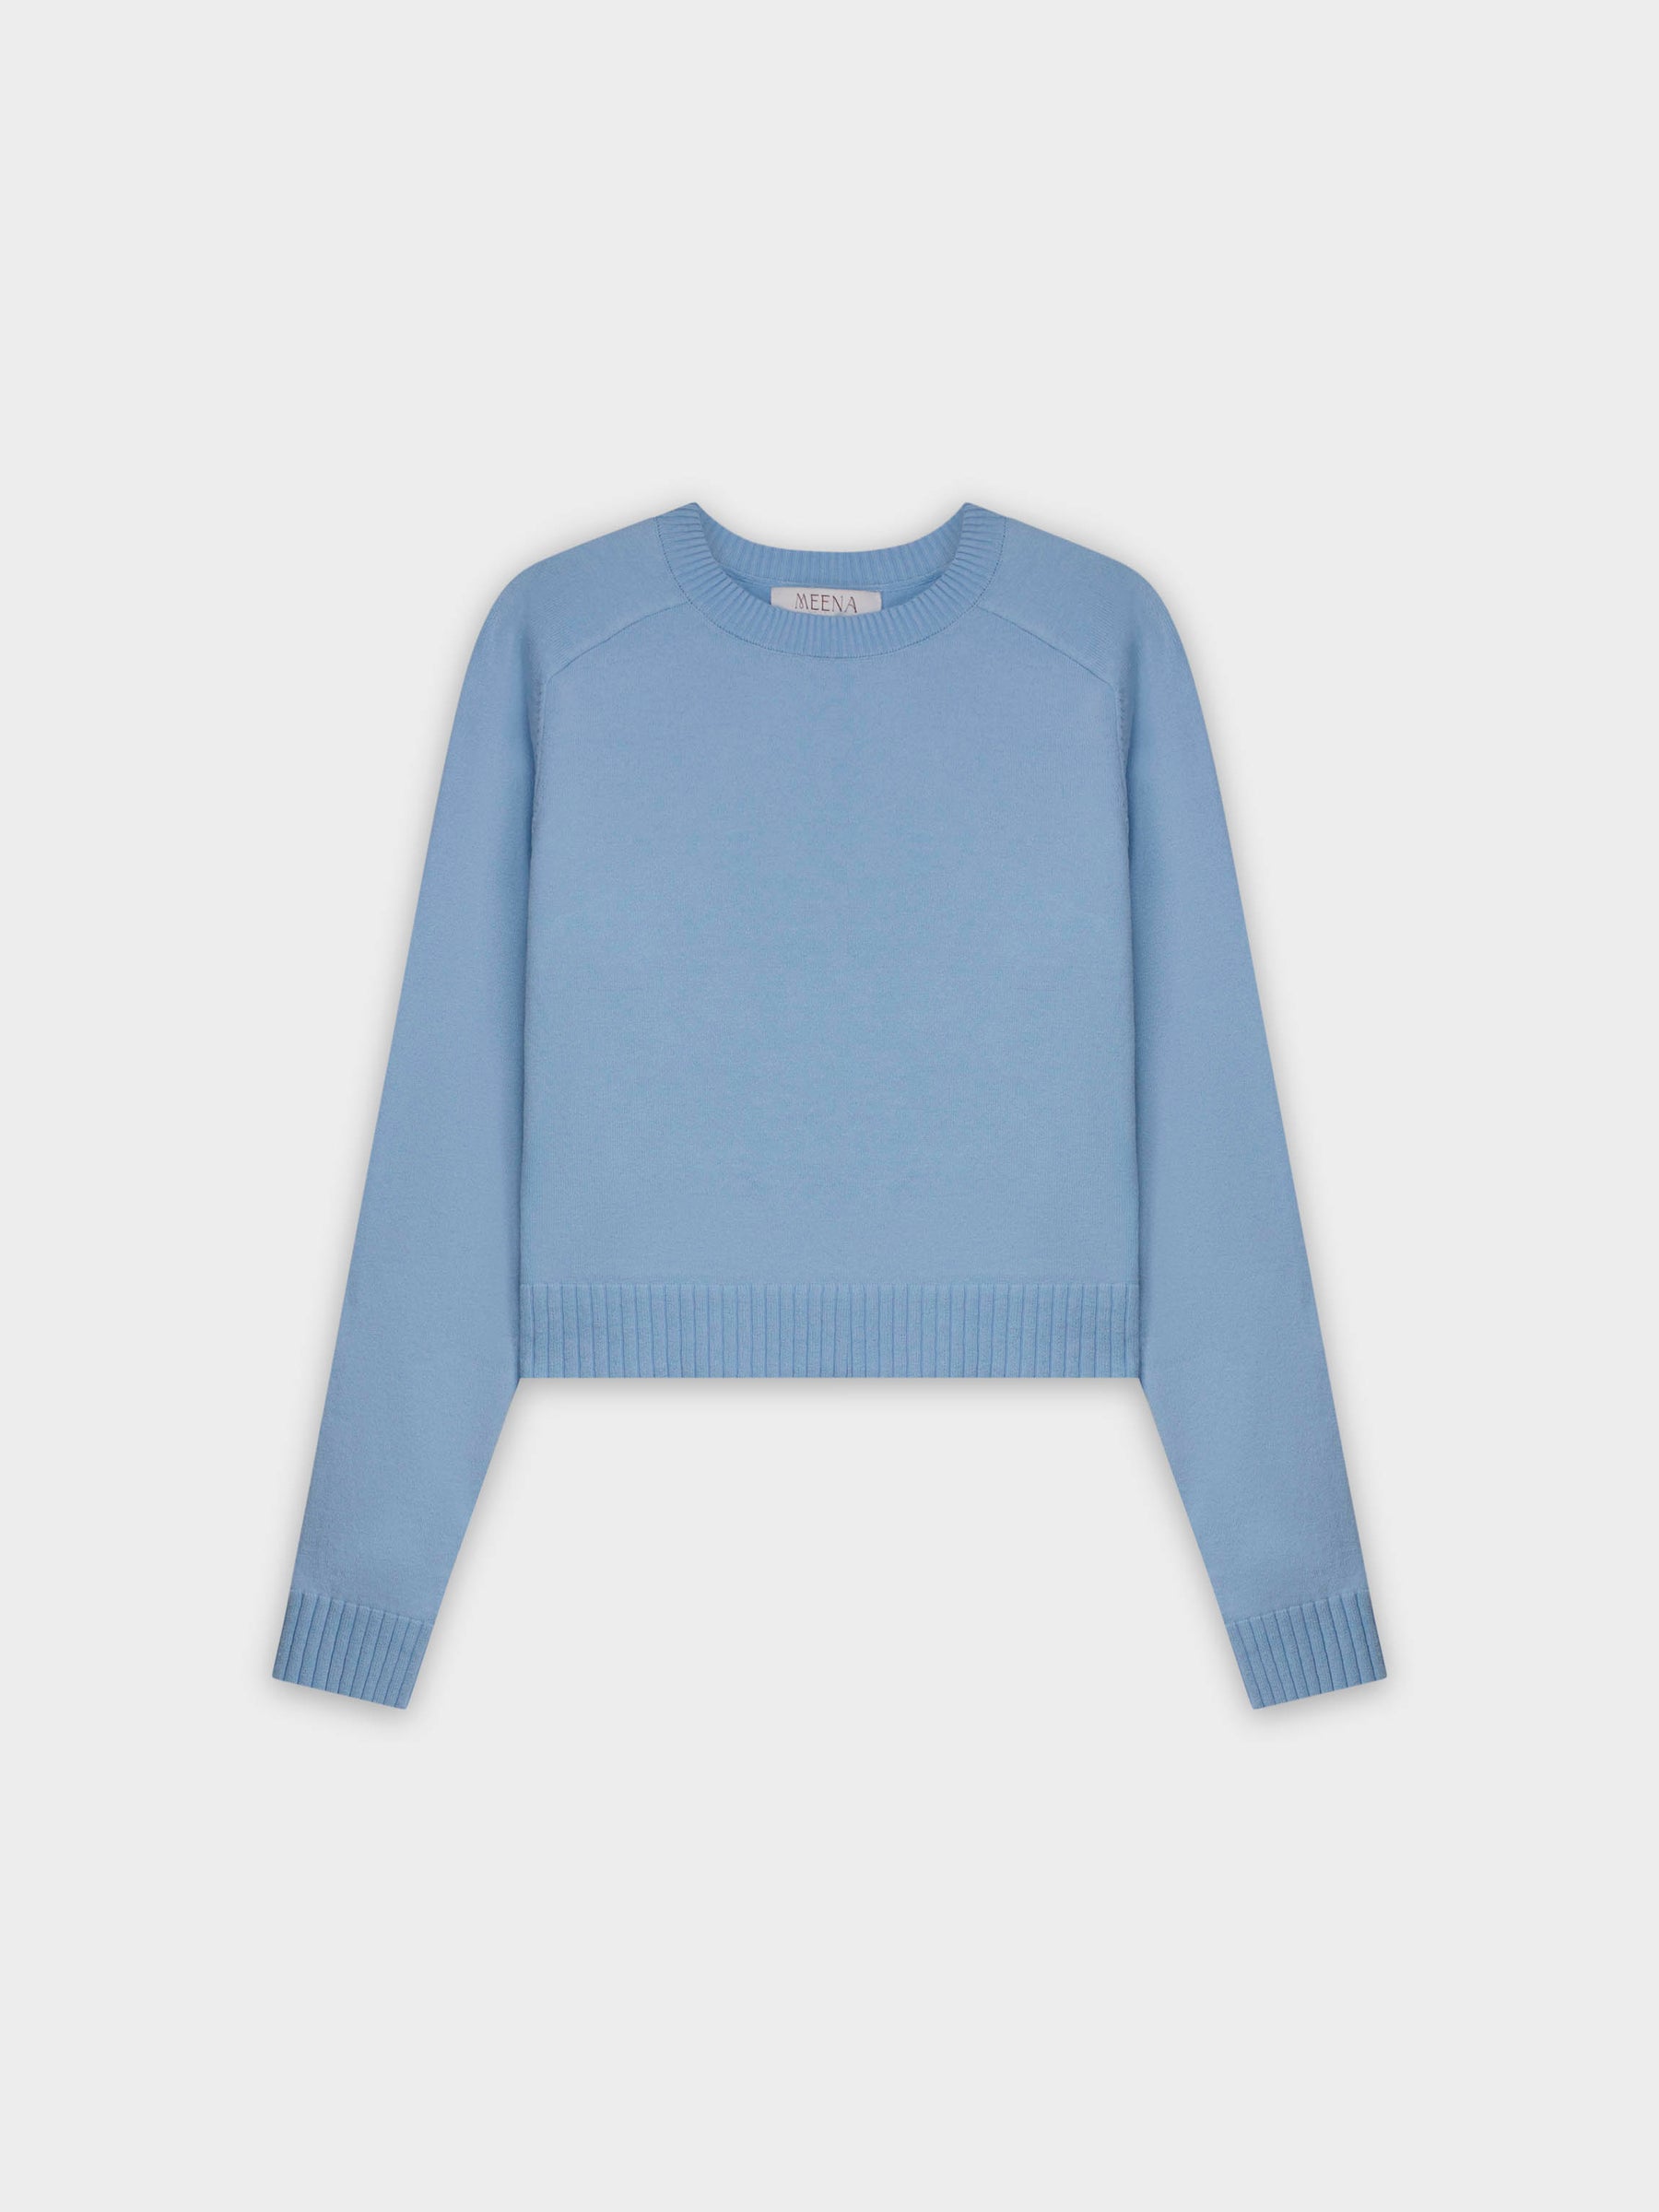 RIBBED BAND SWEATER-OCEAN BLUE